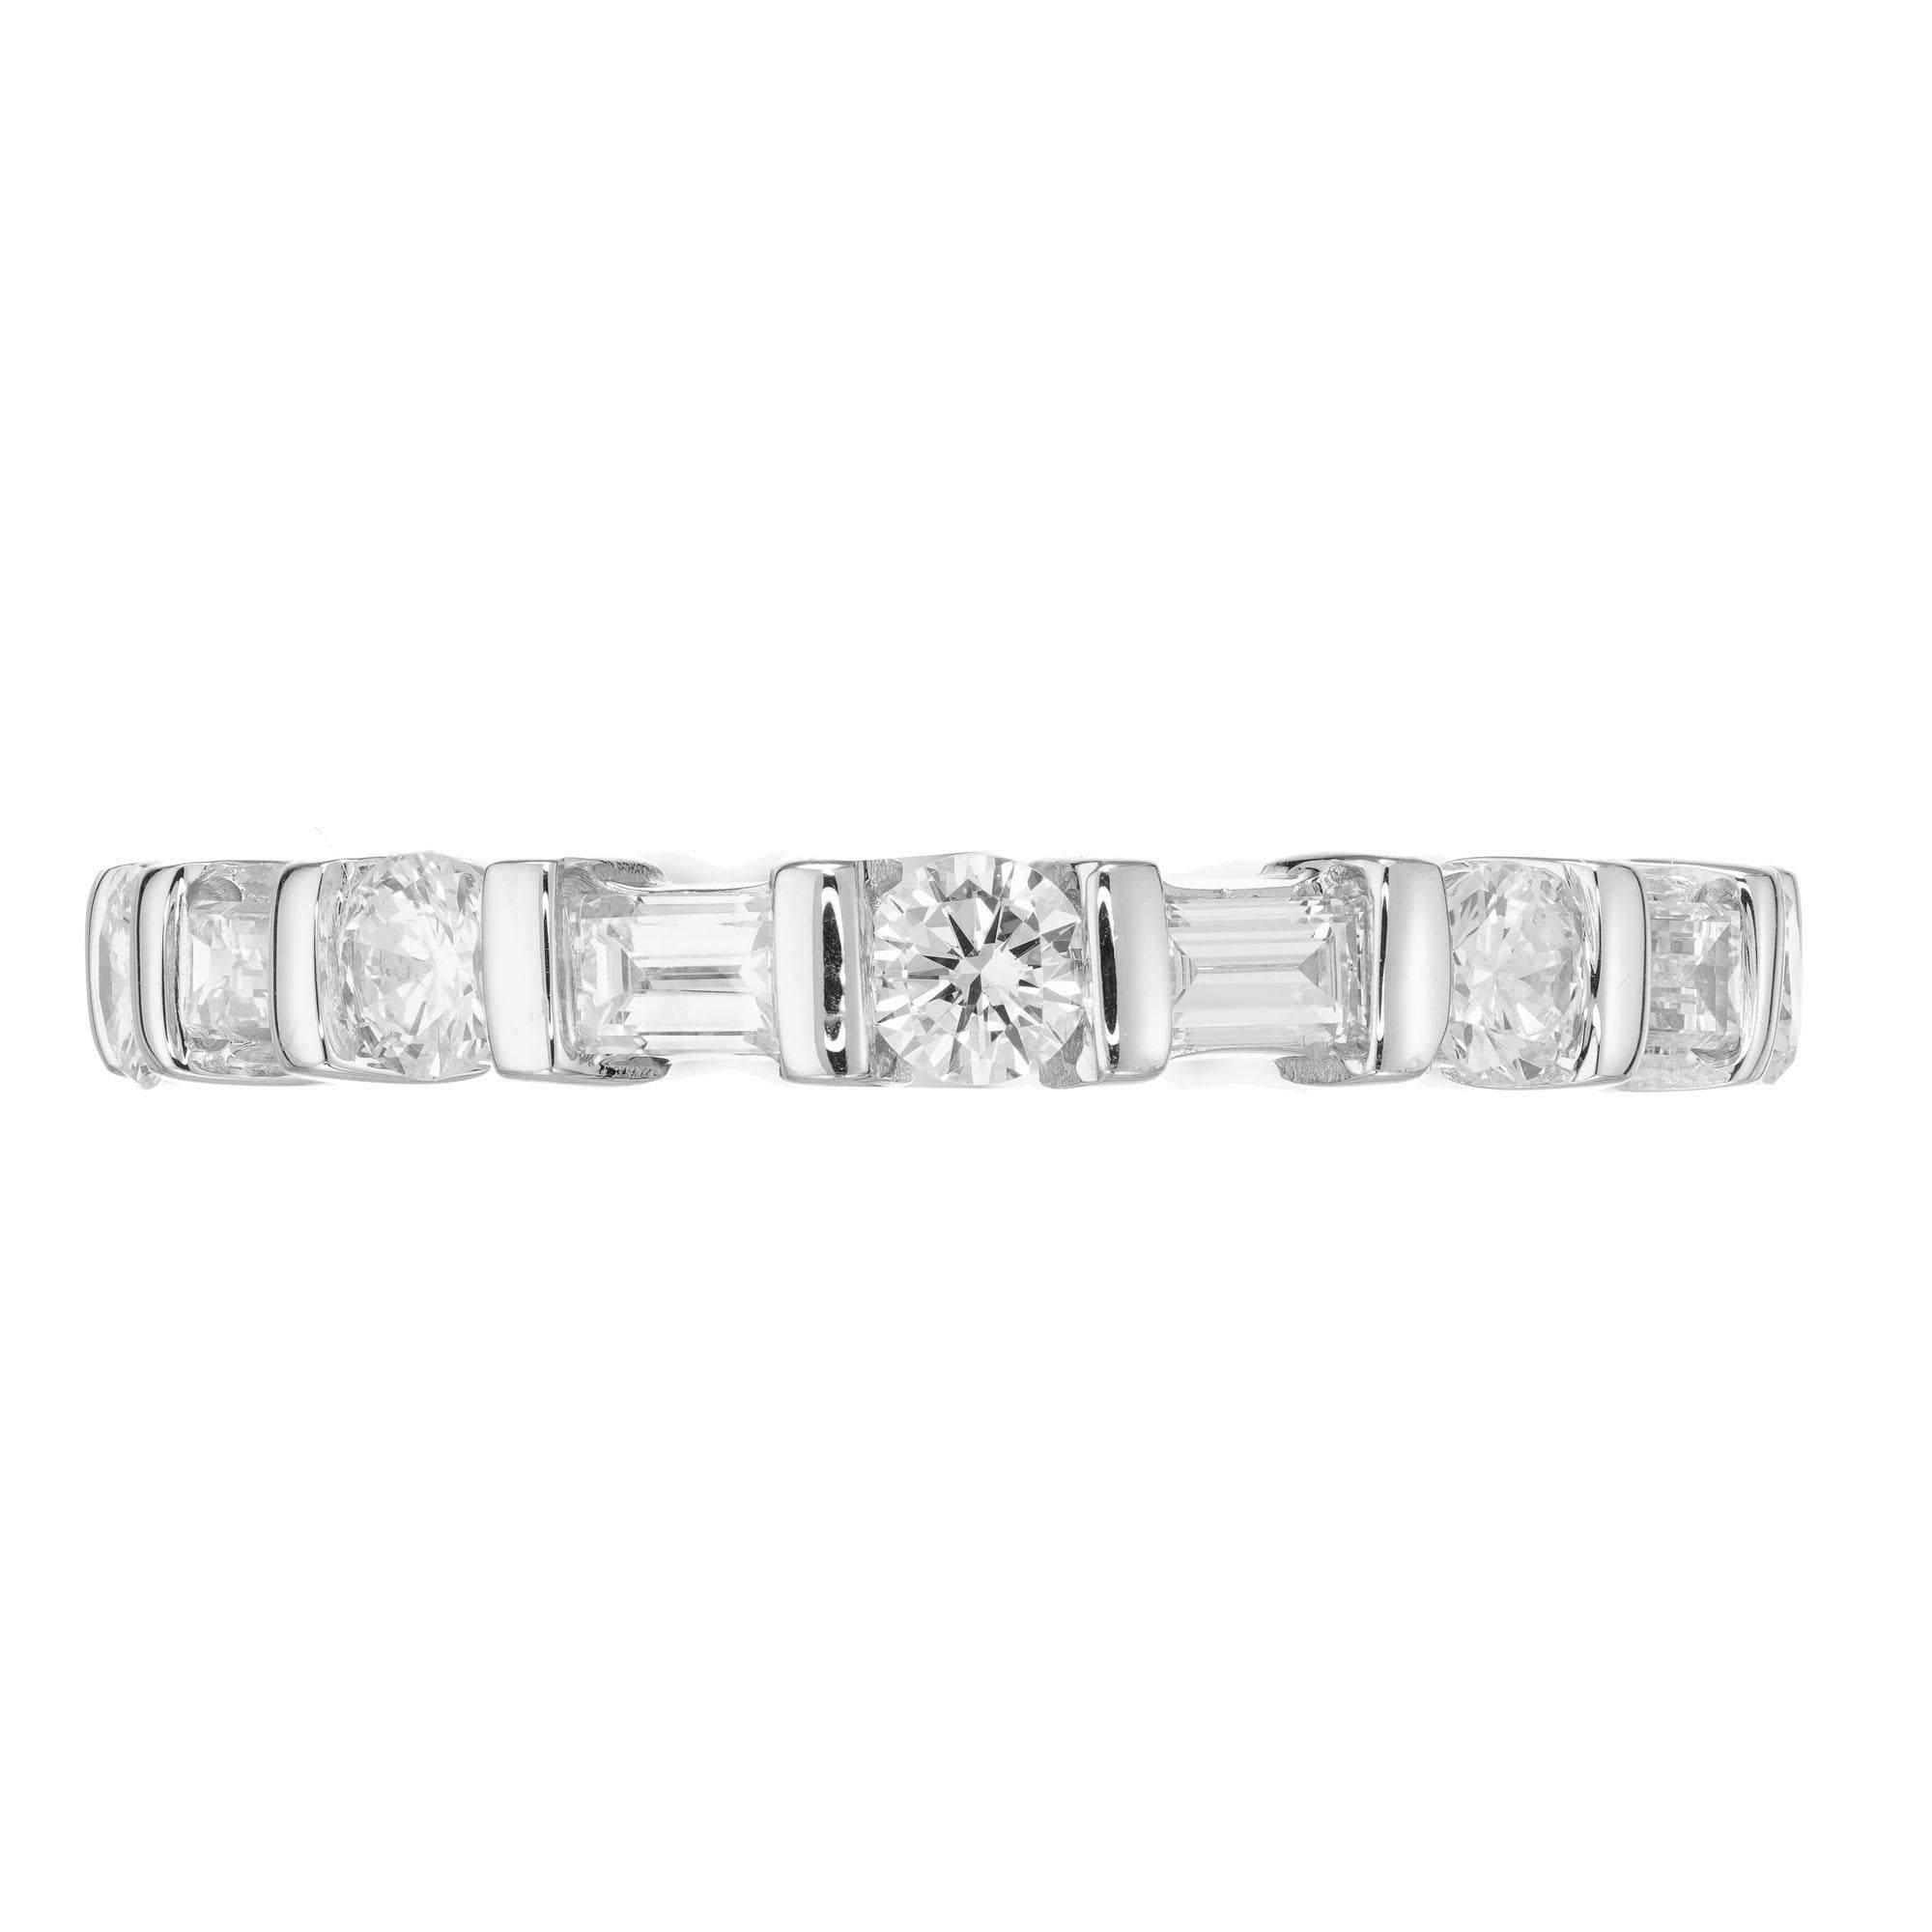 Round and baguette diamond eternity wadding band ring.  1.59 carats of 9 baguette and 9 round eternity ring. Created in the Peter Suchy Workshop.

9 round brilliant cut diamonds G-H VS, approx. .81cts
9 straight cut baguette diamonds G-H VS, approx.